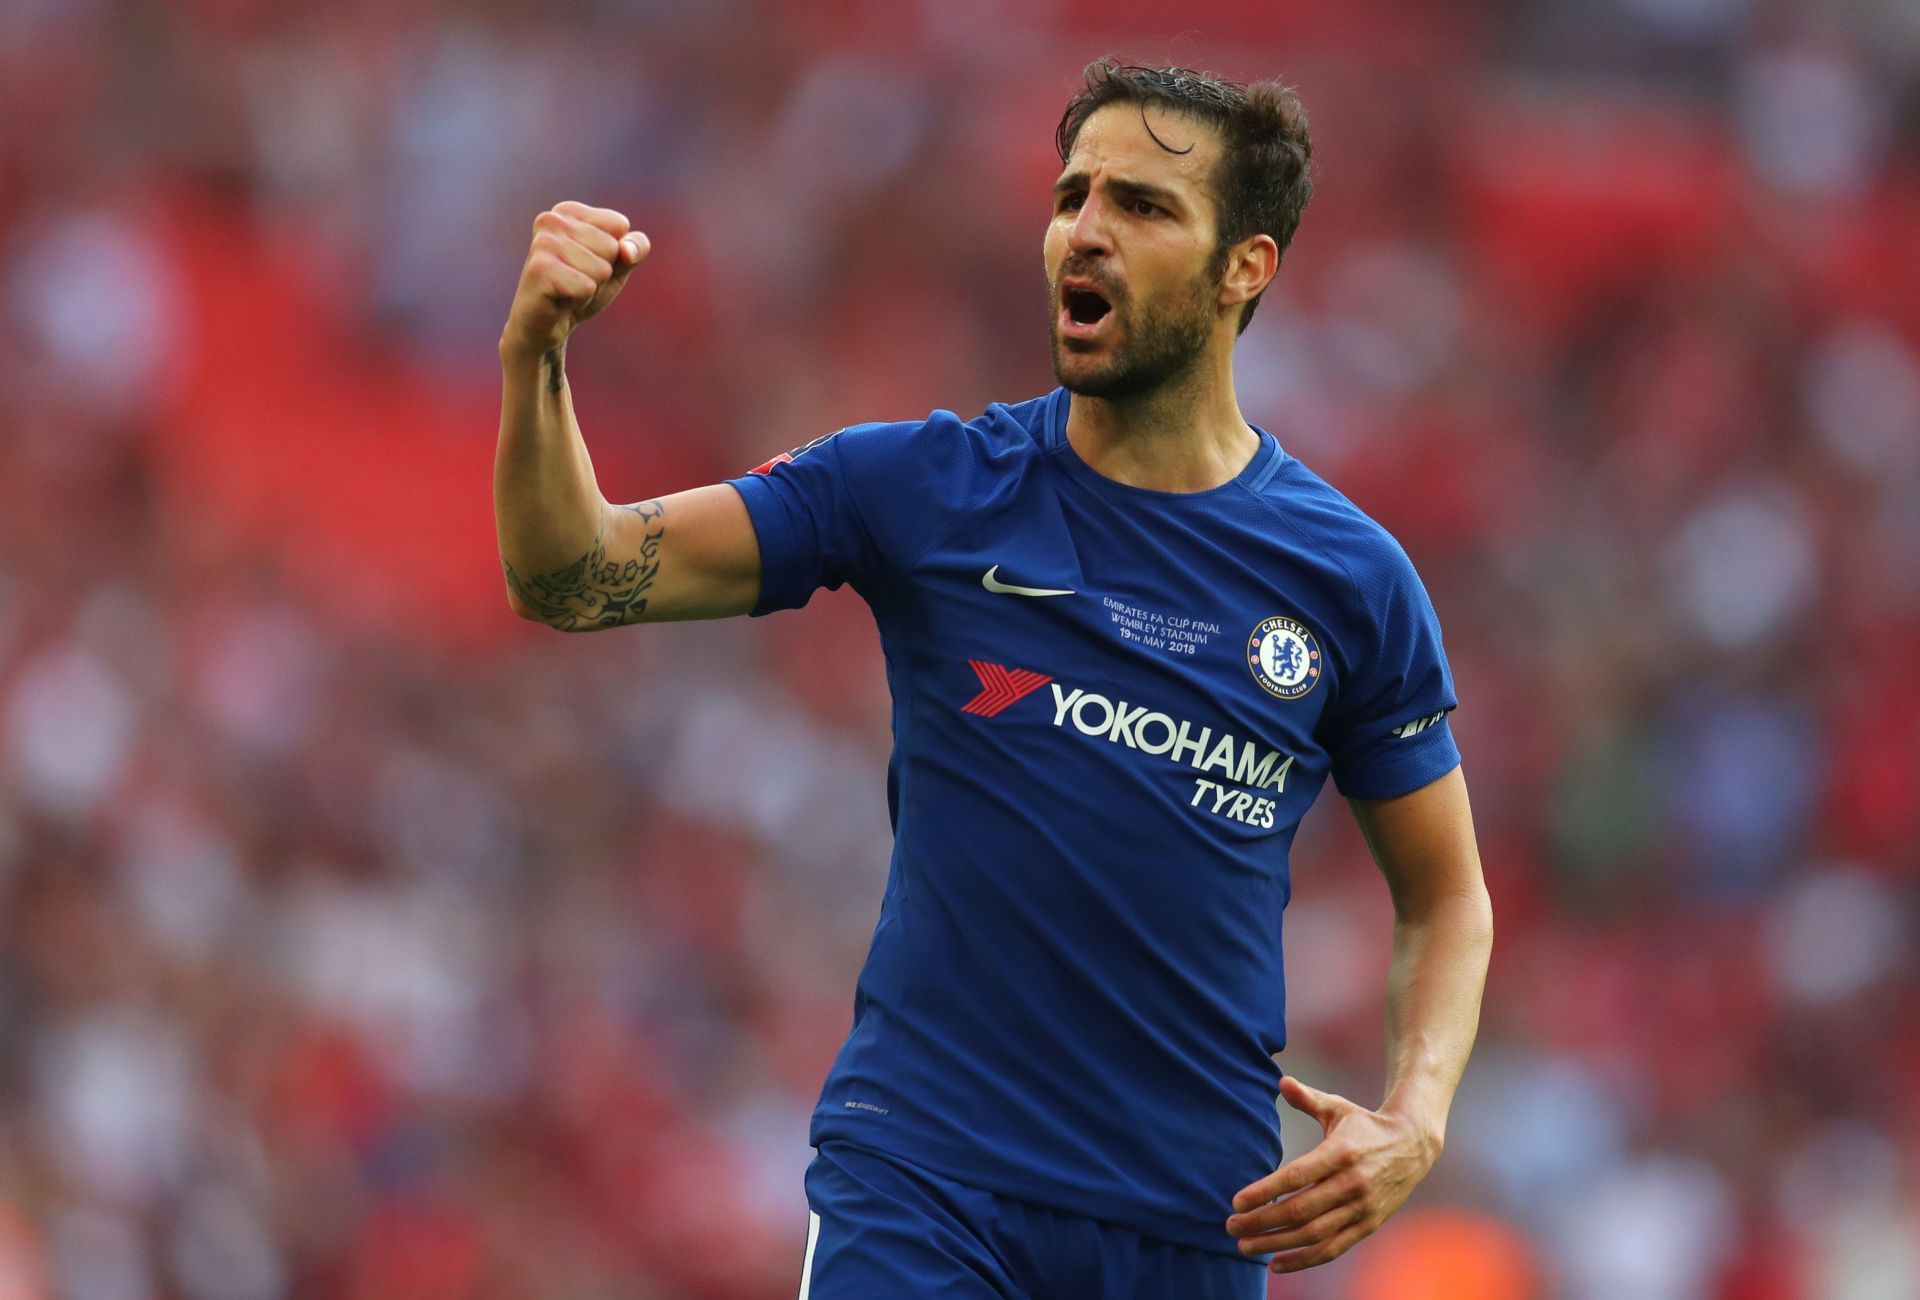 Cesc Fabregas in action against Manchester United - The Emirates FA Cup Final